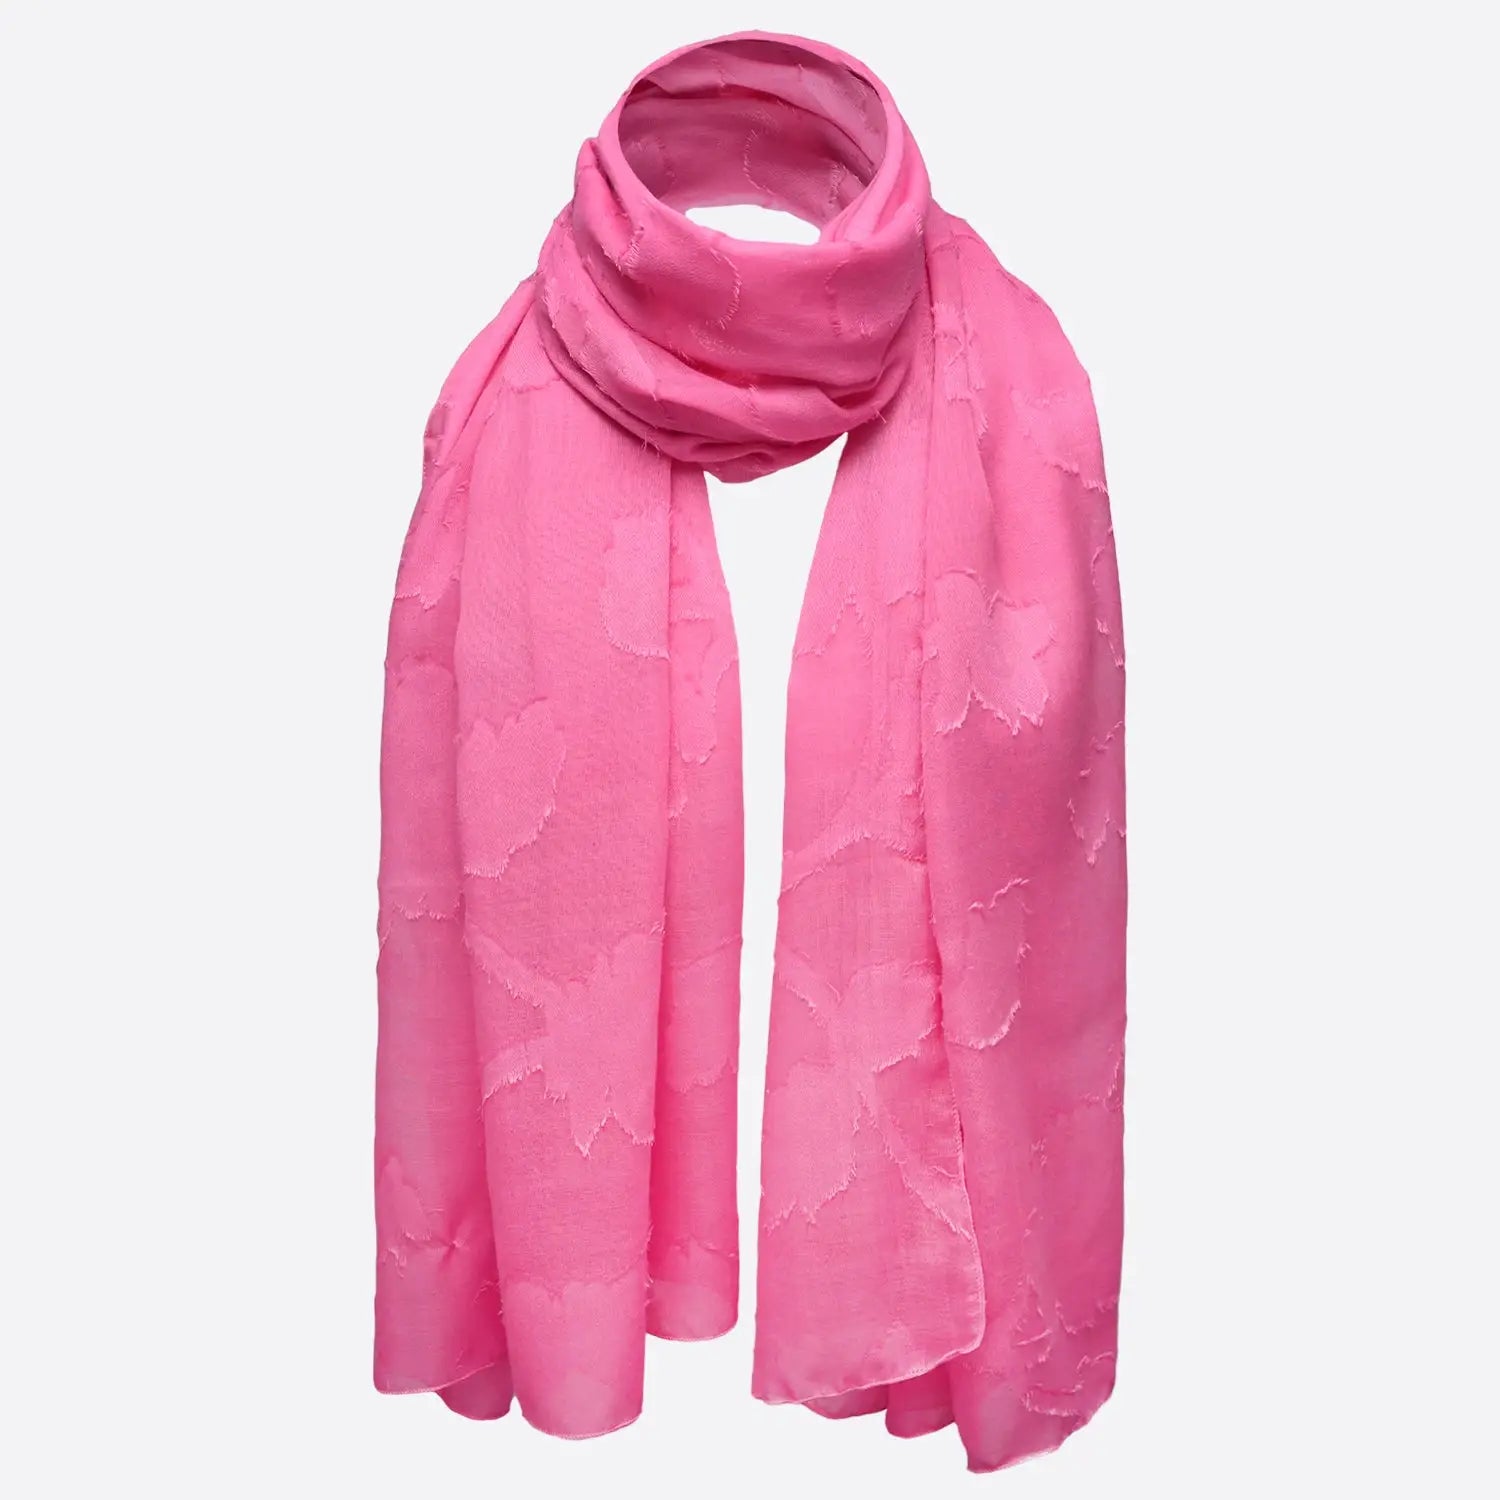 Pink cotton scarf with floral leaf embroidery on a white background